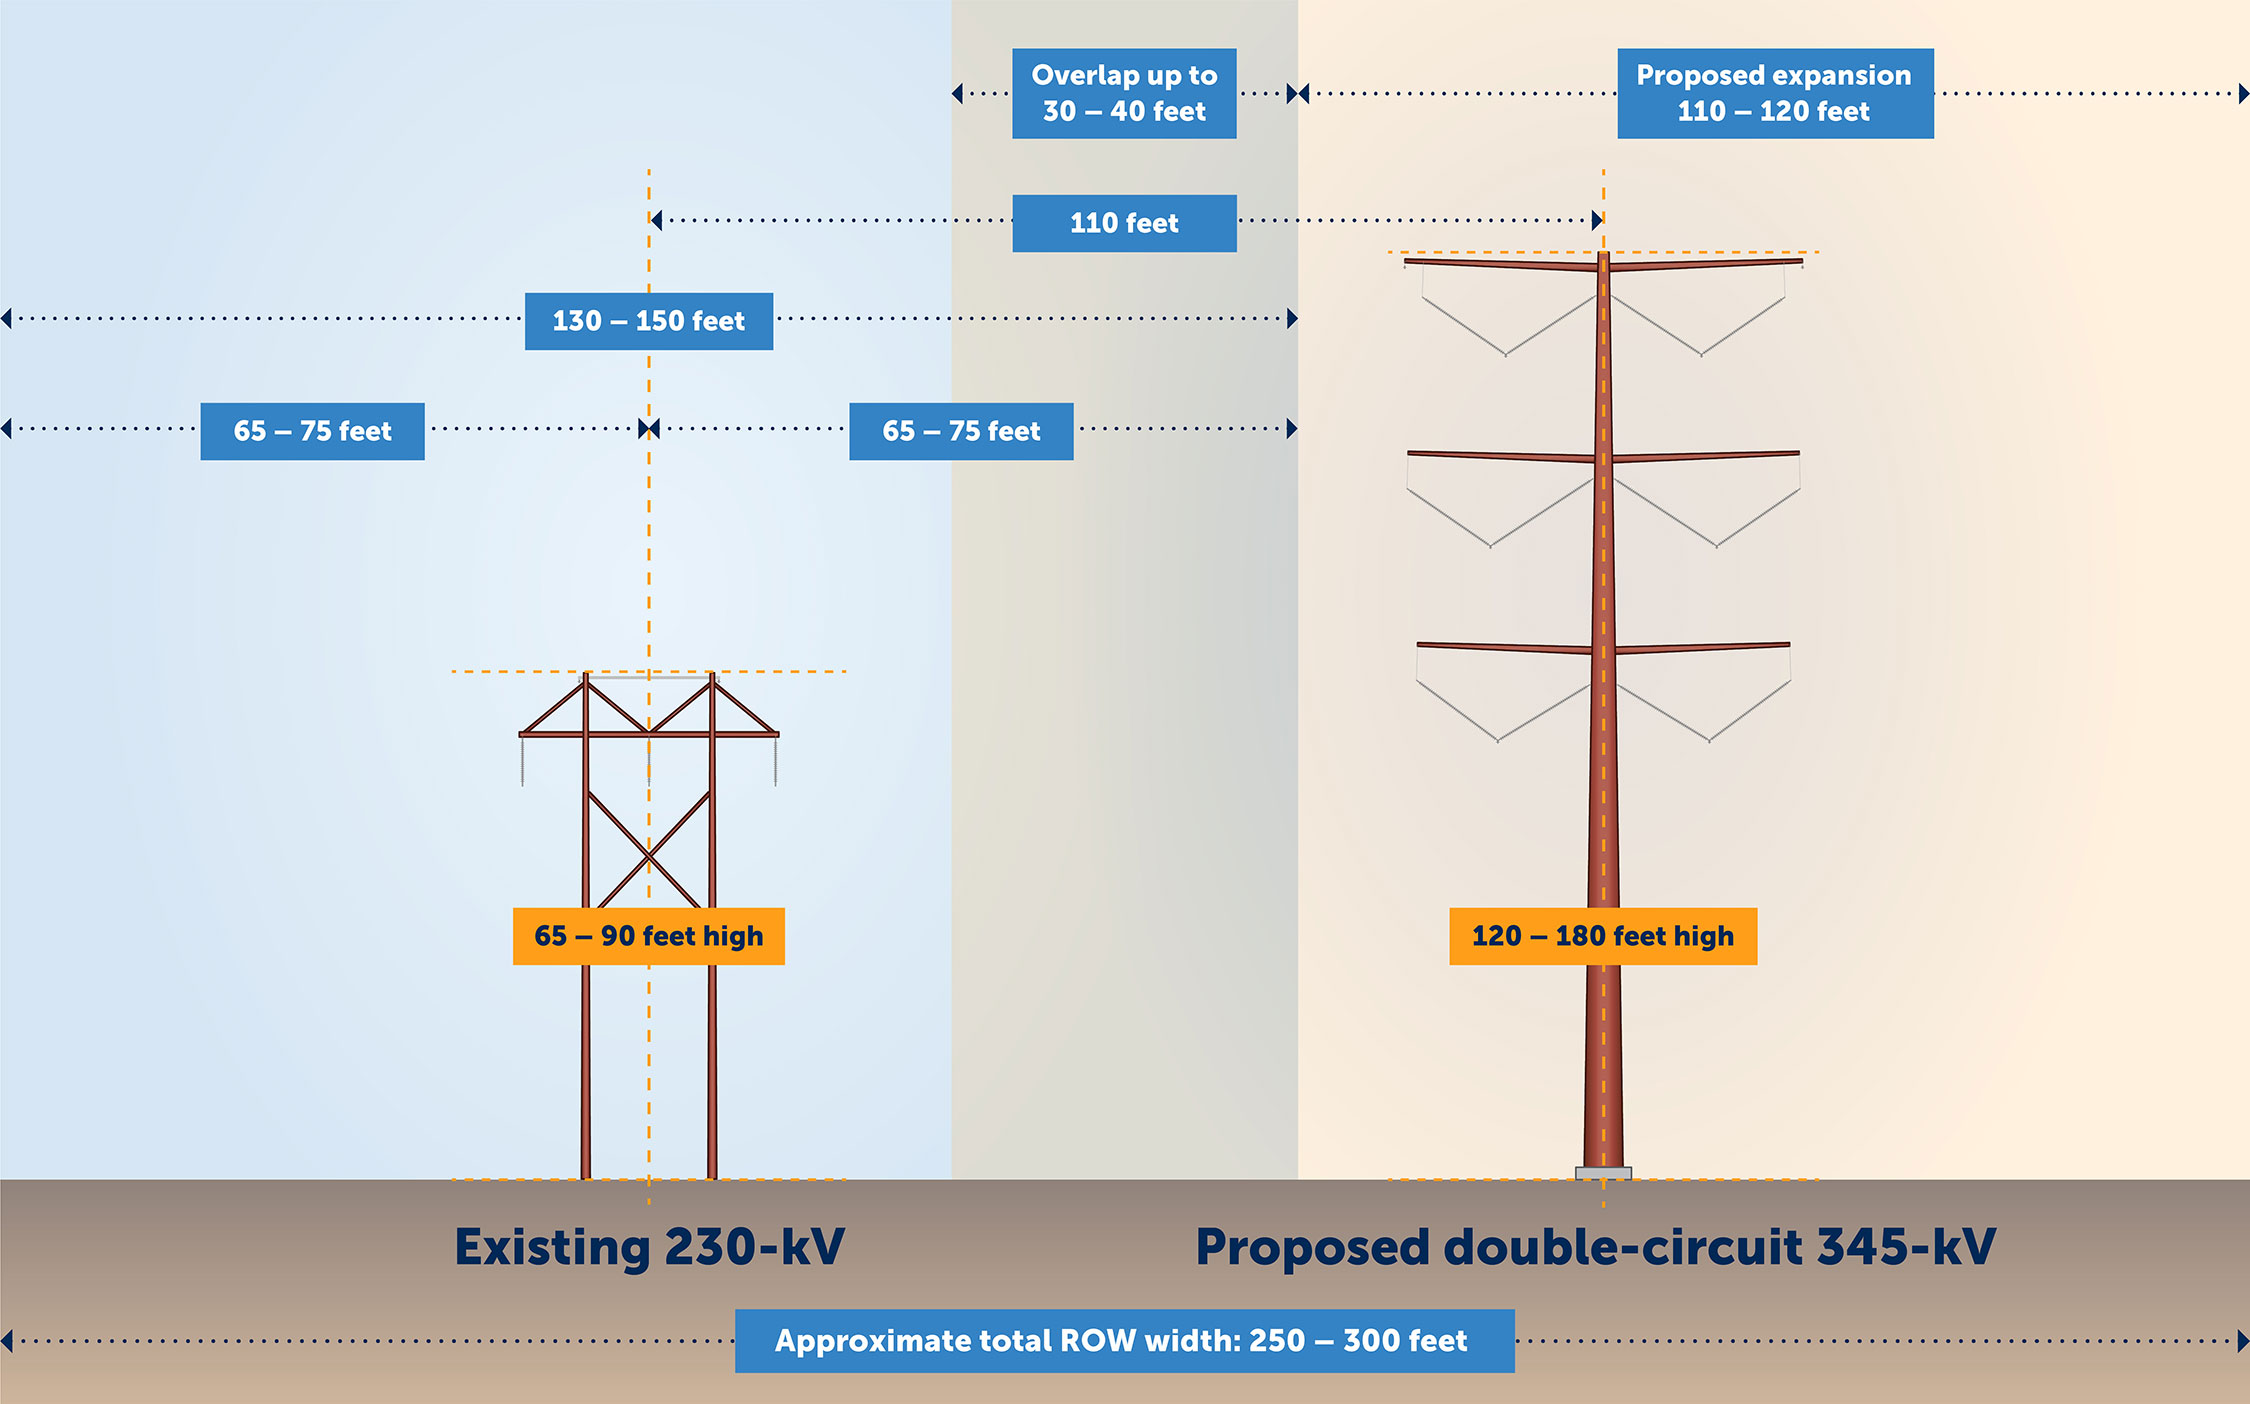 Proposed double-circuit line is 110 feet taller wtih a 110-120 foot expansion.